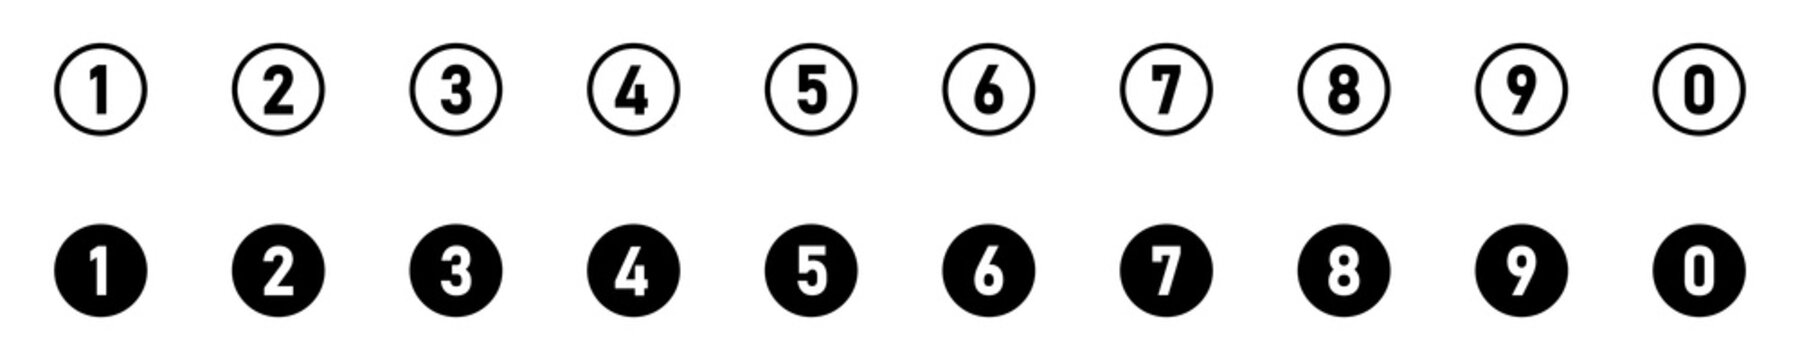 Button numbers. Number, from 1 to 9, flat design isolated vector. EPS 10